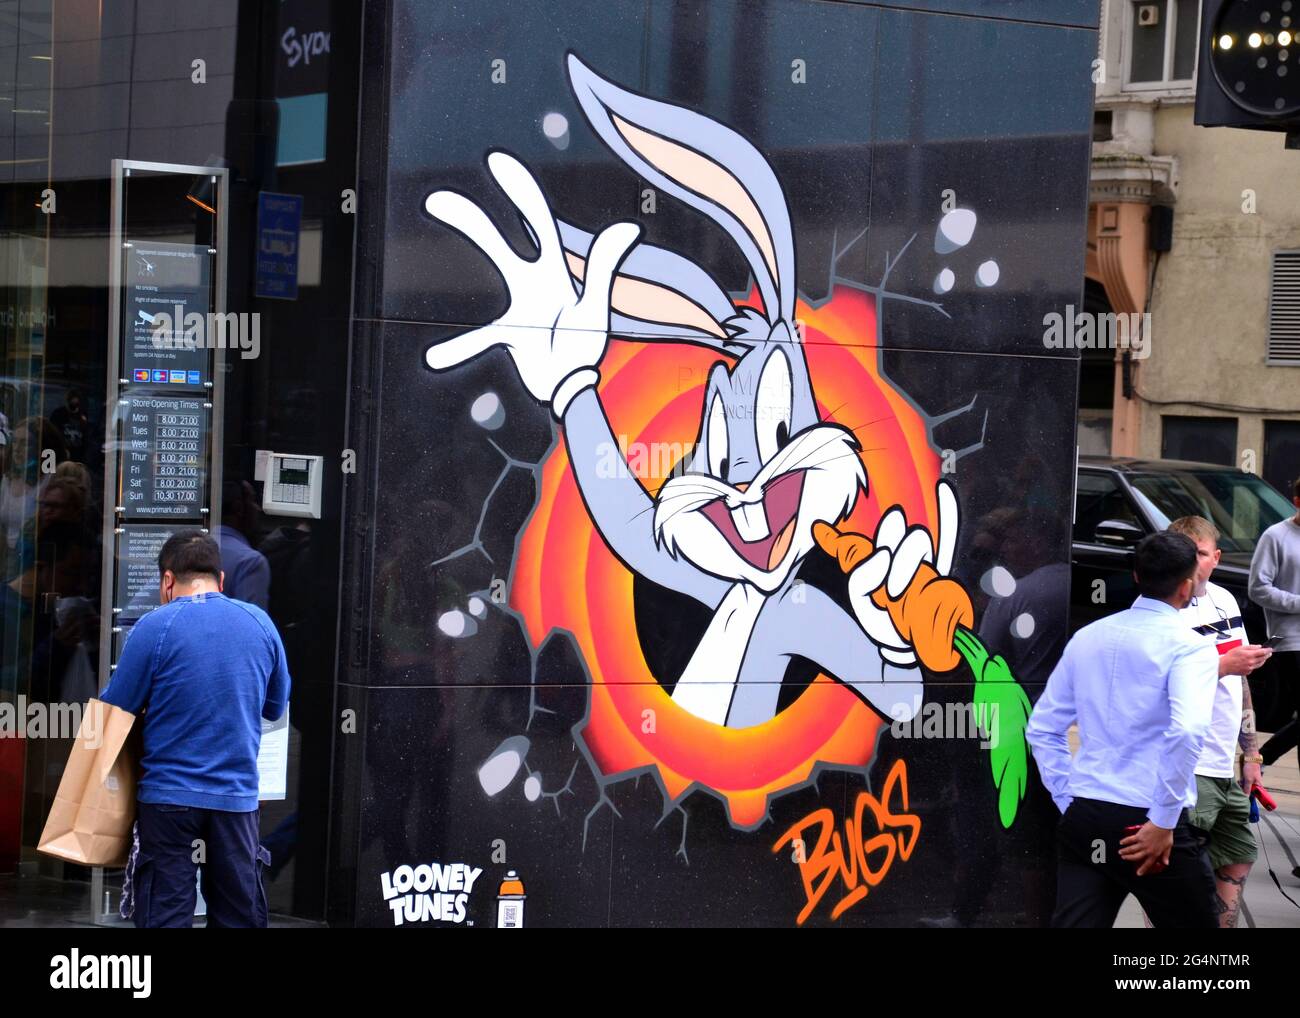 Passers - by near a Bugs Bunny image, part of a Looney Tunes art trail which has opened in Manchester, England, United Kingdom. The trail will mark the film Space Jam: A New Legacy which will be in cinemas in Manchester soon. The cartoon images appear in 12 locations in Manchester. Stock Photo